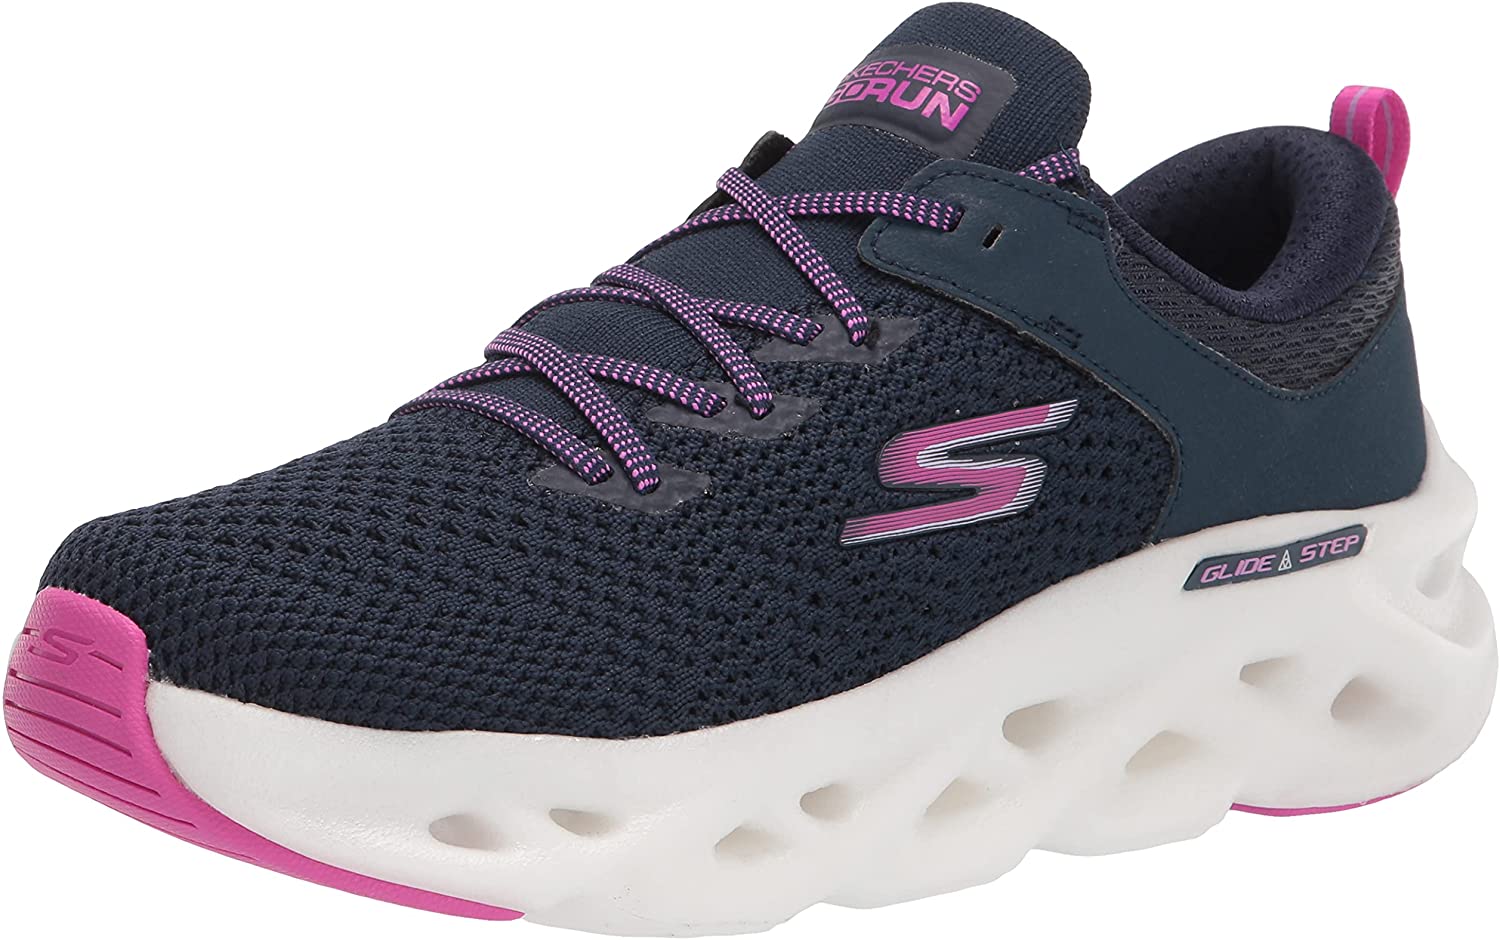 Skechers - Womens Gorun Glide-Step Max - Dash Charge Slip On Shoes